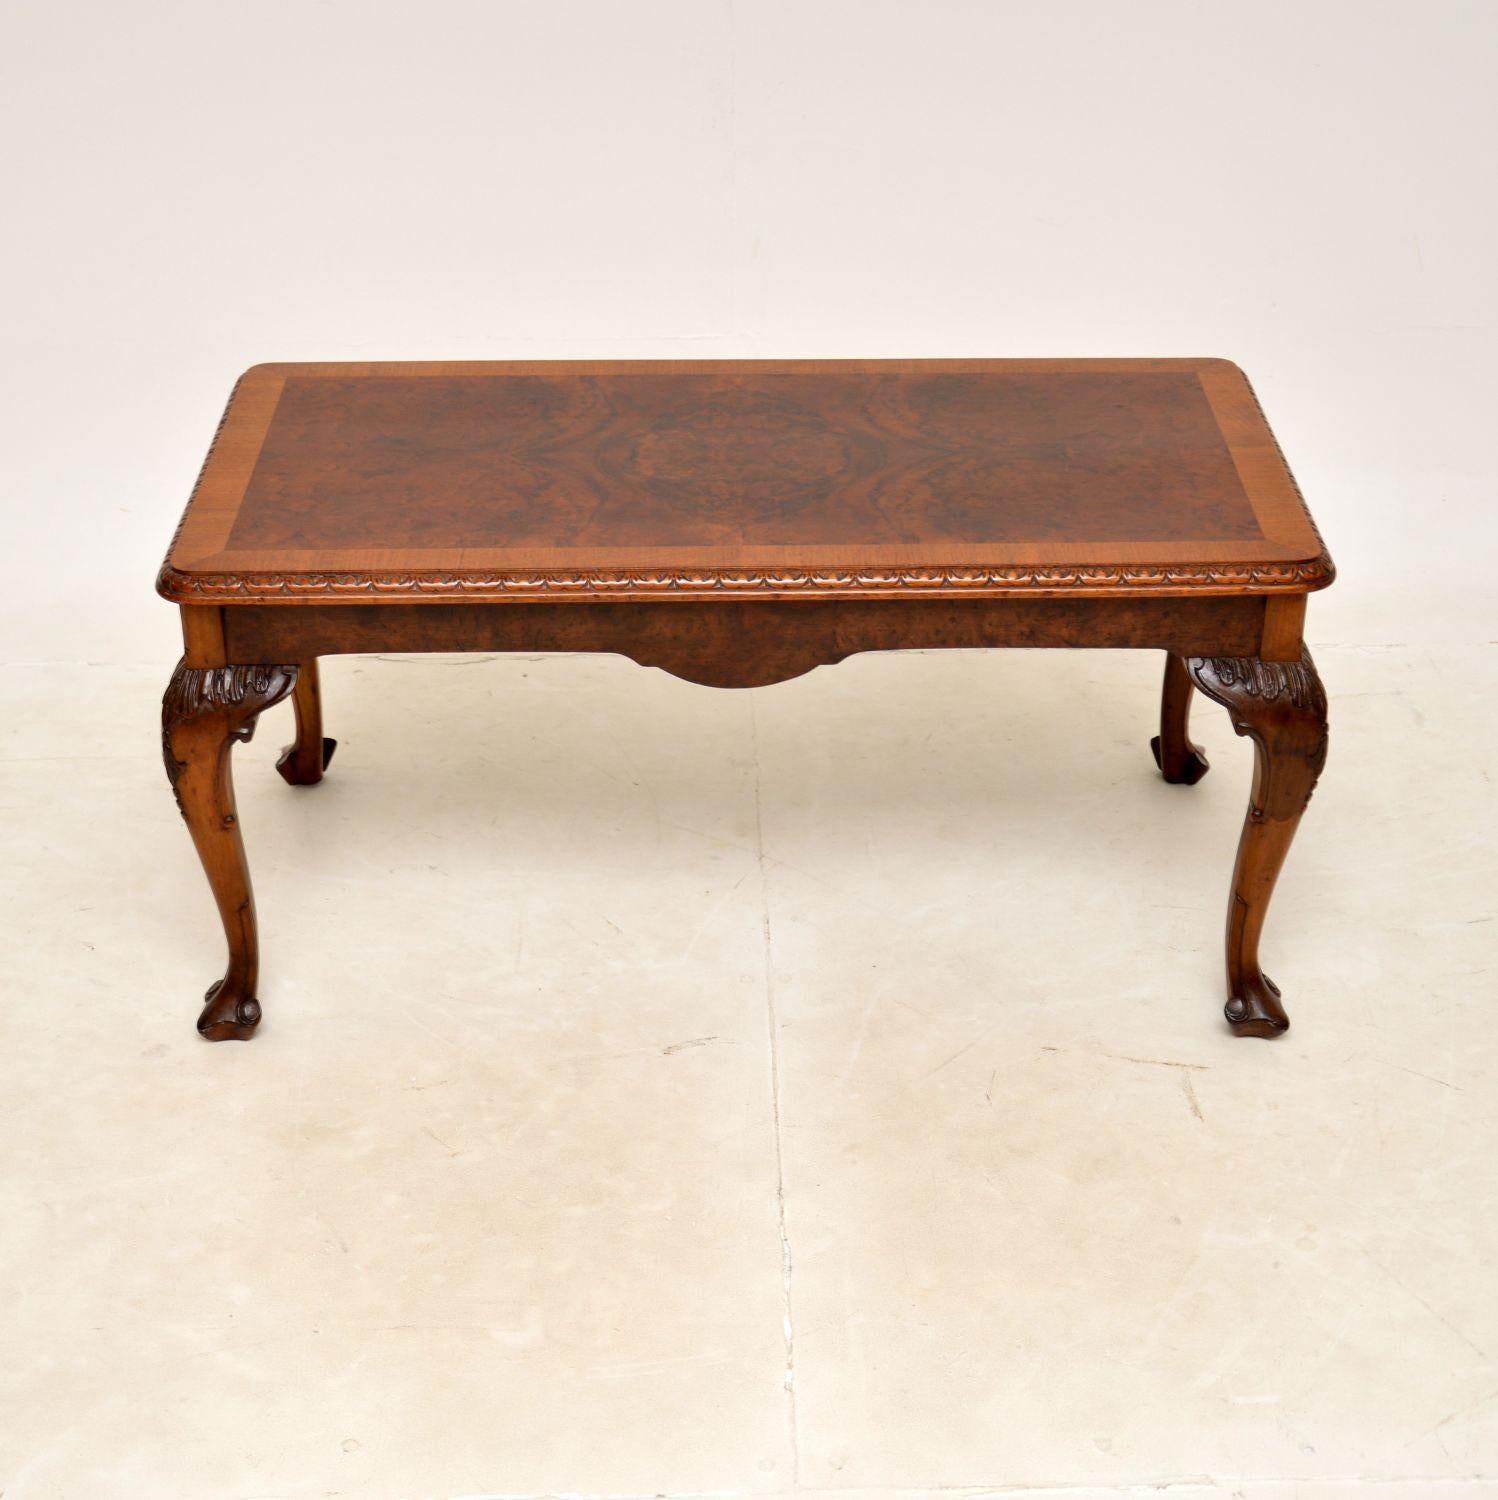 A beautiful antique walnut coffee table in the Queen Anne style. This was made in England, it dates from around the 1920-30’s.

The quality is superb, this has stunning burr walnut grain patterns on the top and side edges. The top is cross banded,